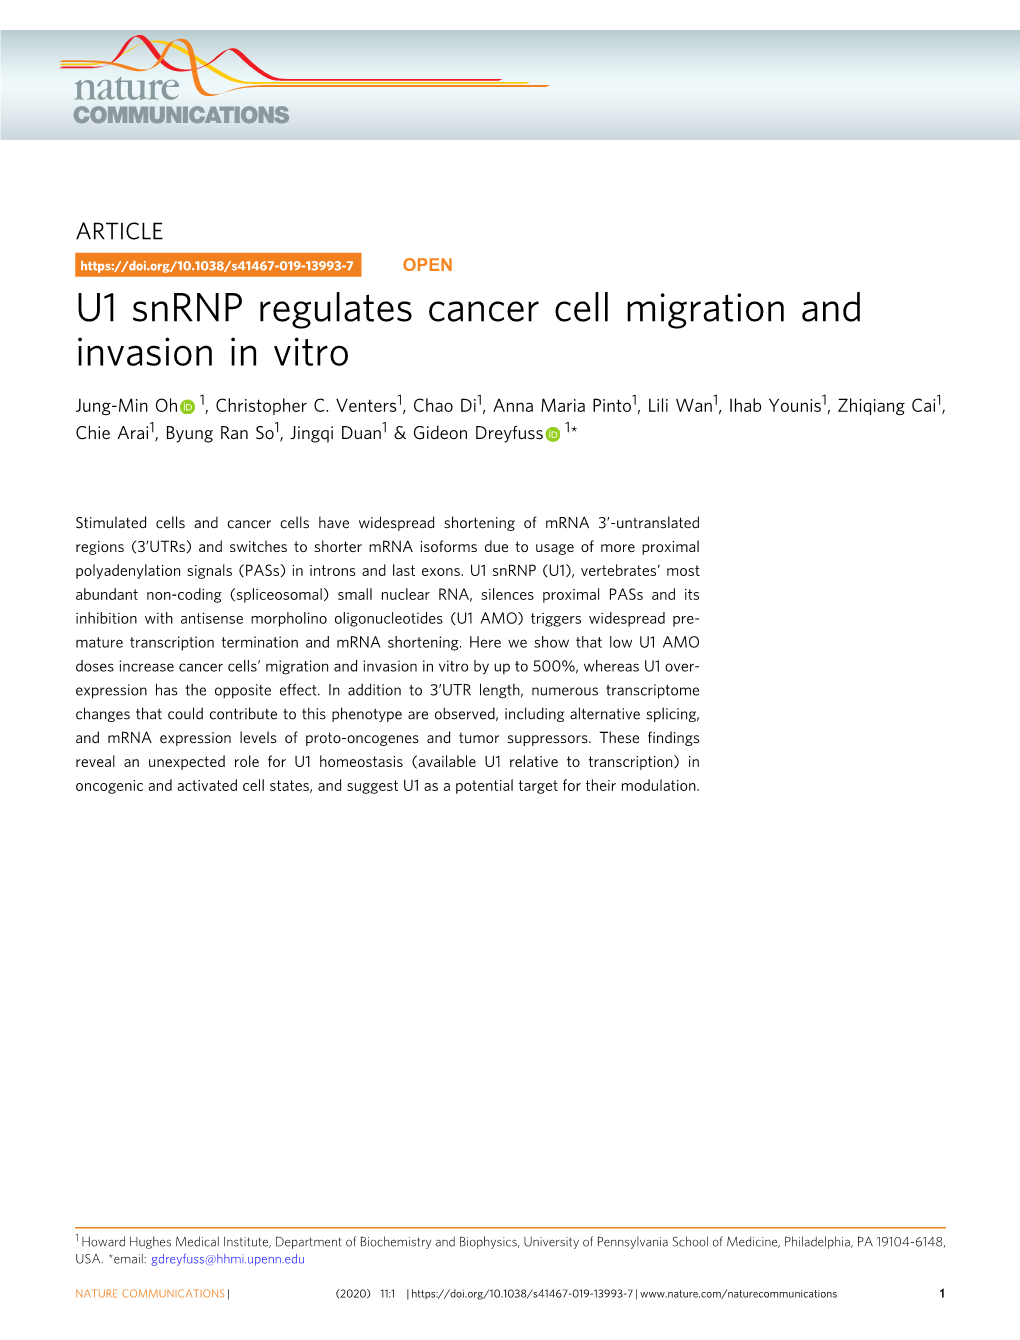 U1 Snrnp Regulates Cancer Cell Migration and Invasion in Vitro